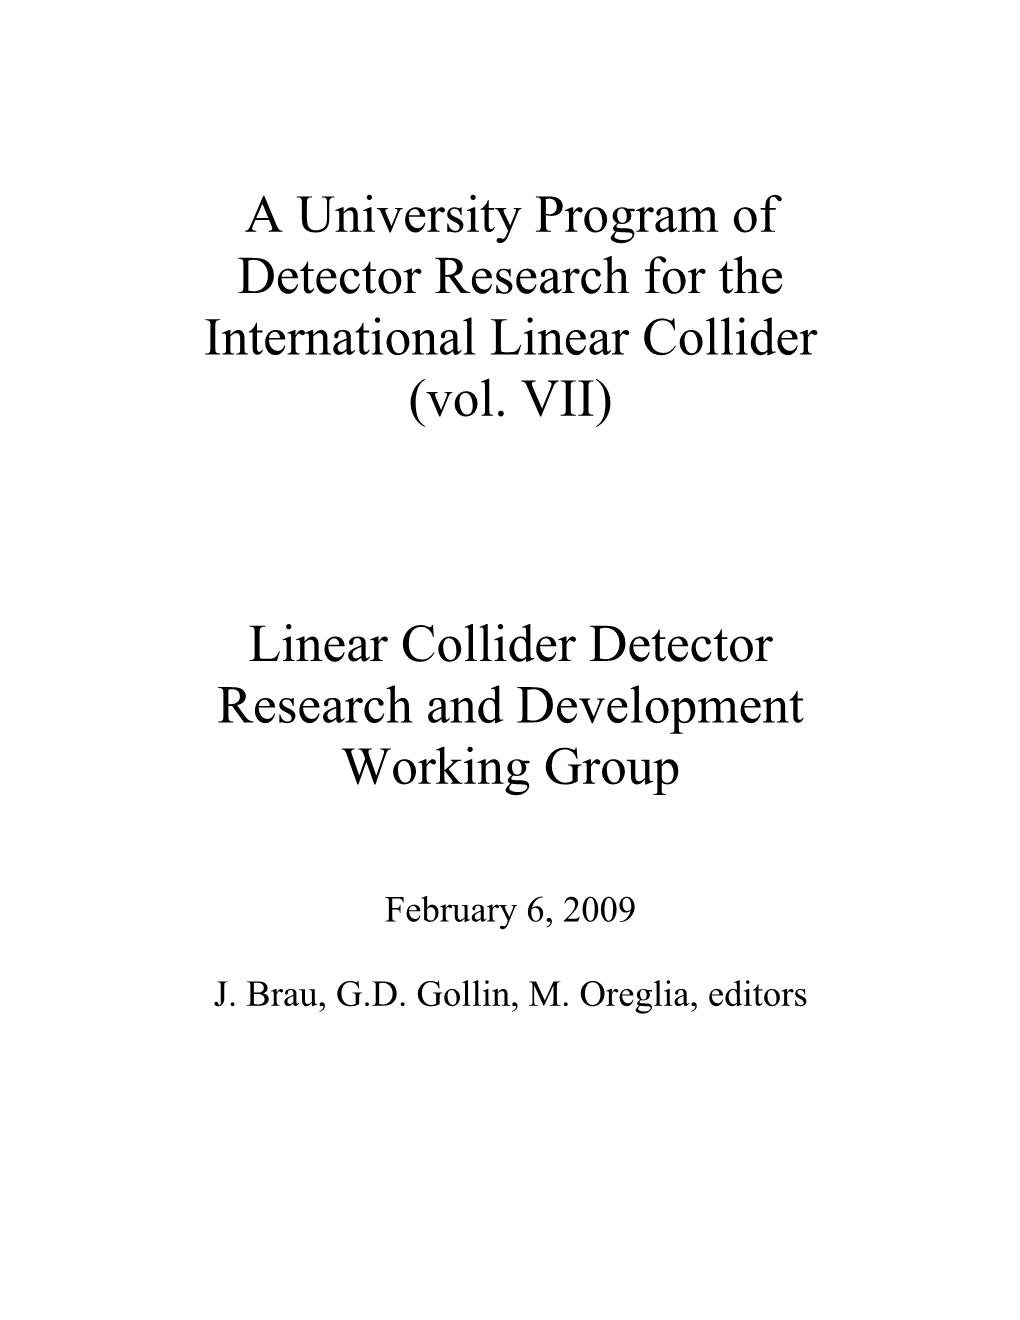 Linear Collider Detector Research and Development Working Group